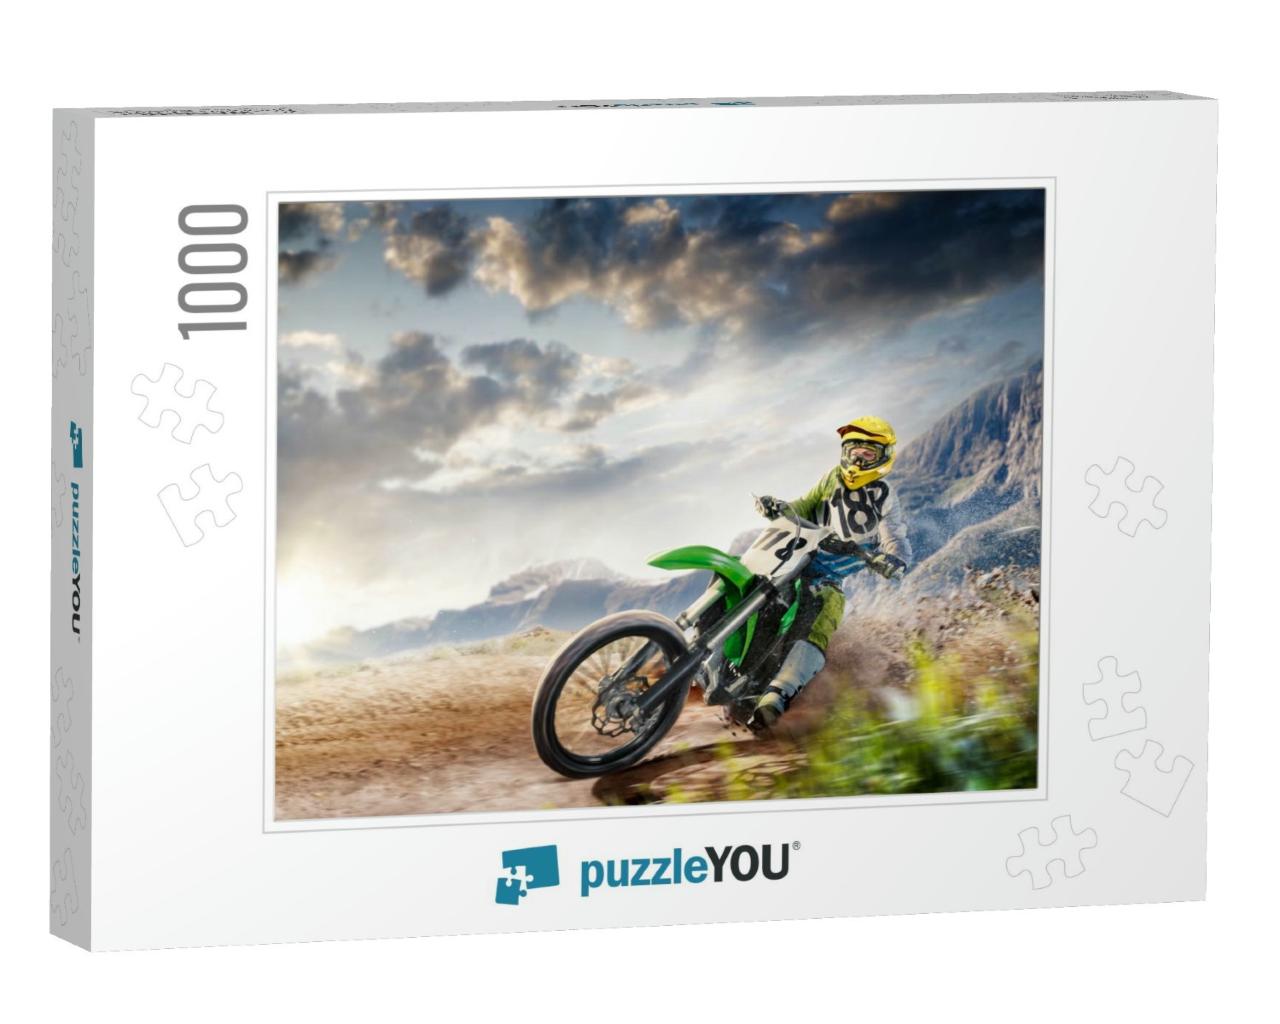 Professional Enduro Bike Rider on Action. Turn on Sand Te... Jigsaw Puzzle with 1000 pieces